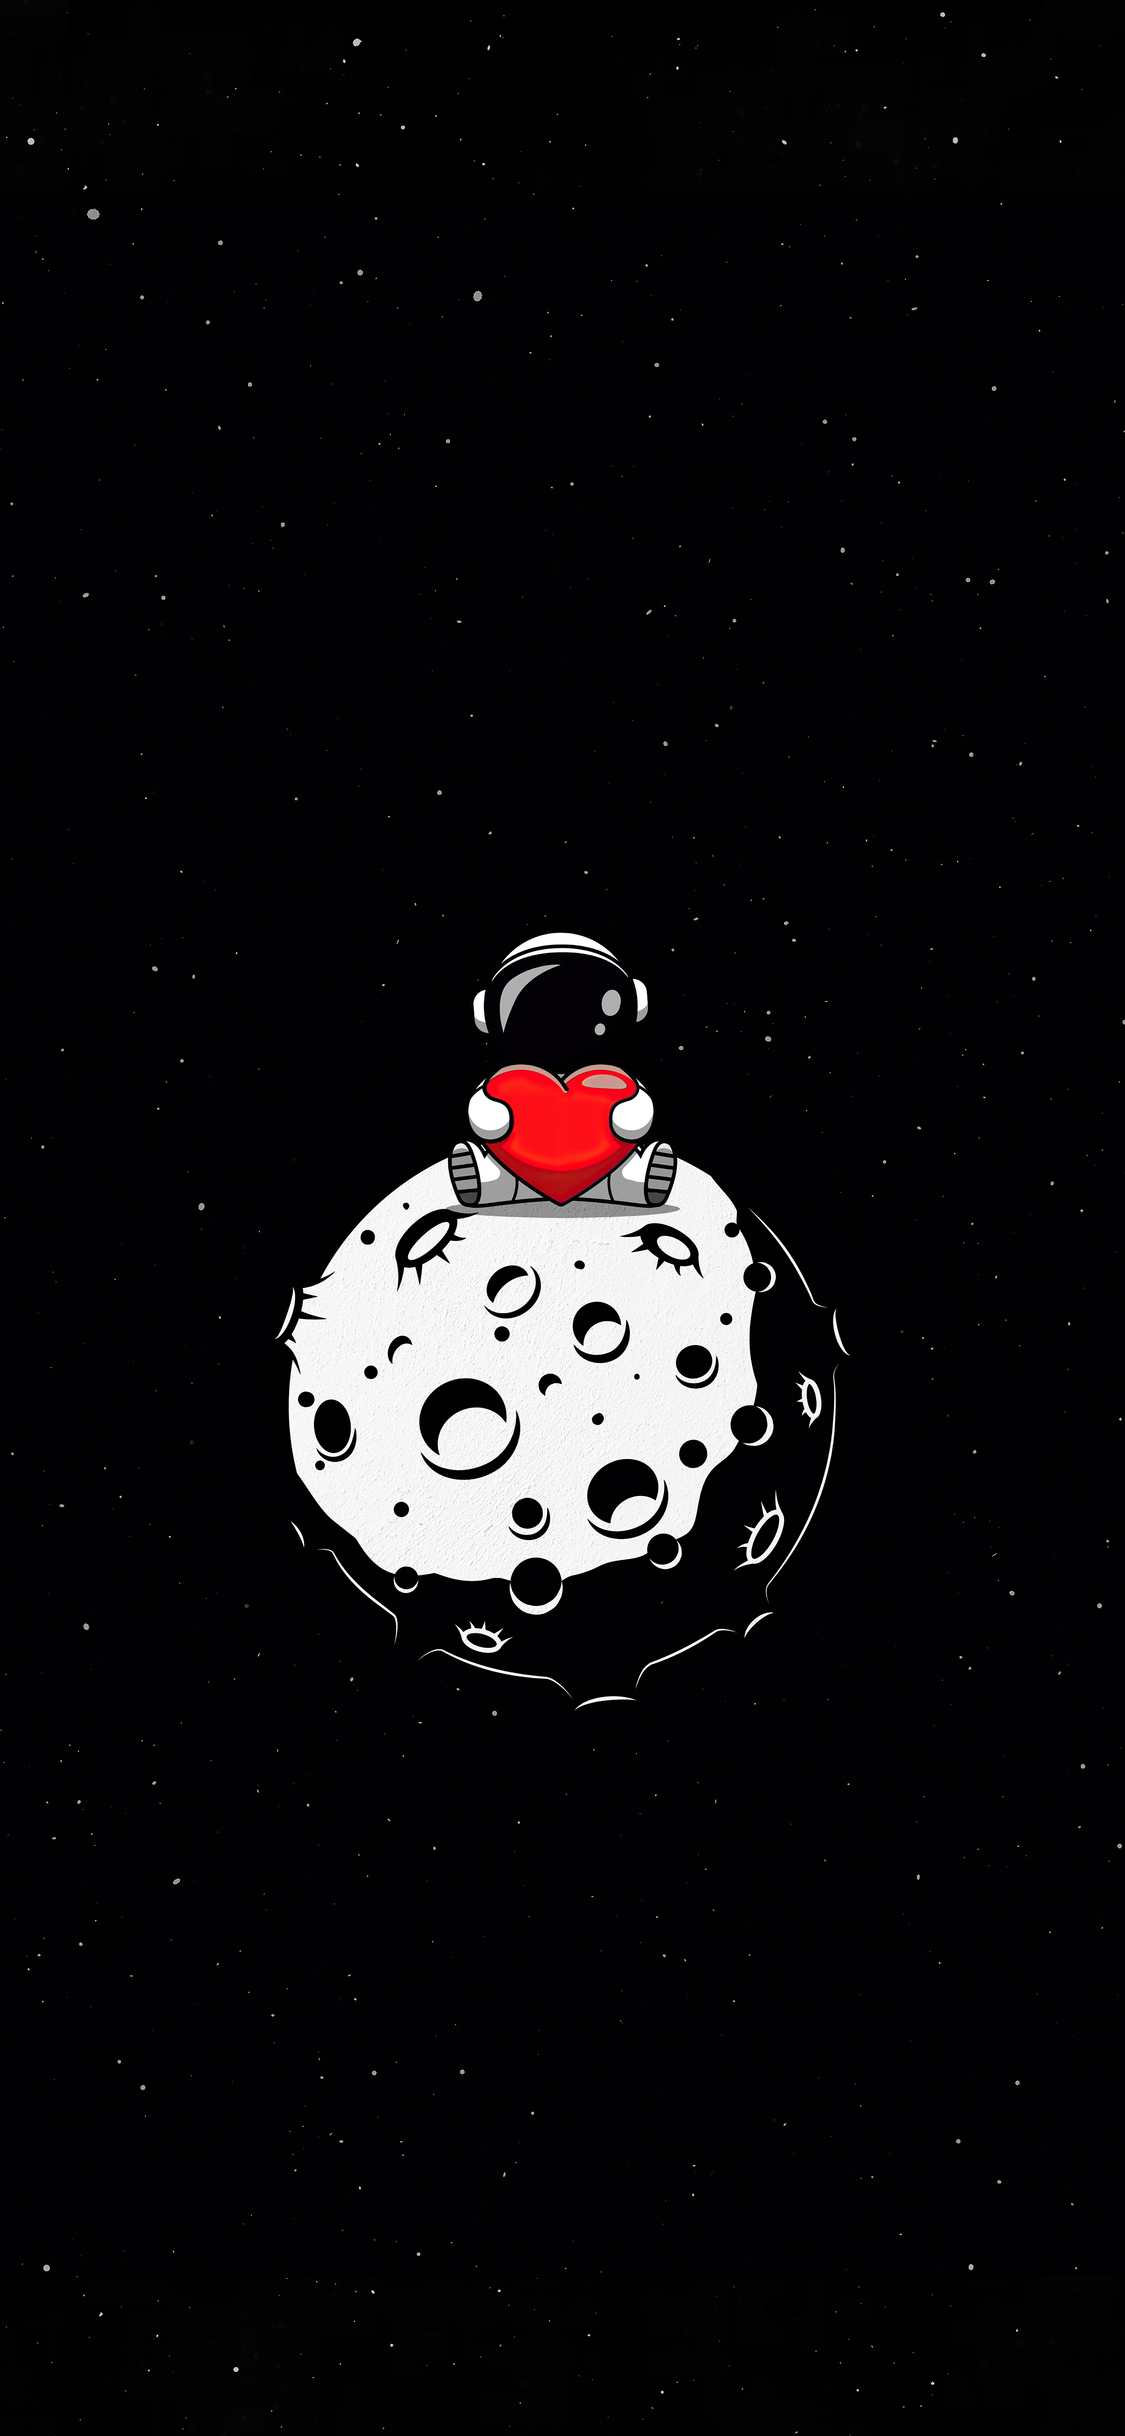 Little Astronaut On Moon With Heart In Hand 5k iPhone XS, iPhone iPhone X HD 4k Wallpaper, Image, Background, Photo and Picture